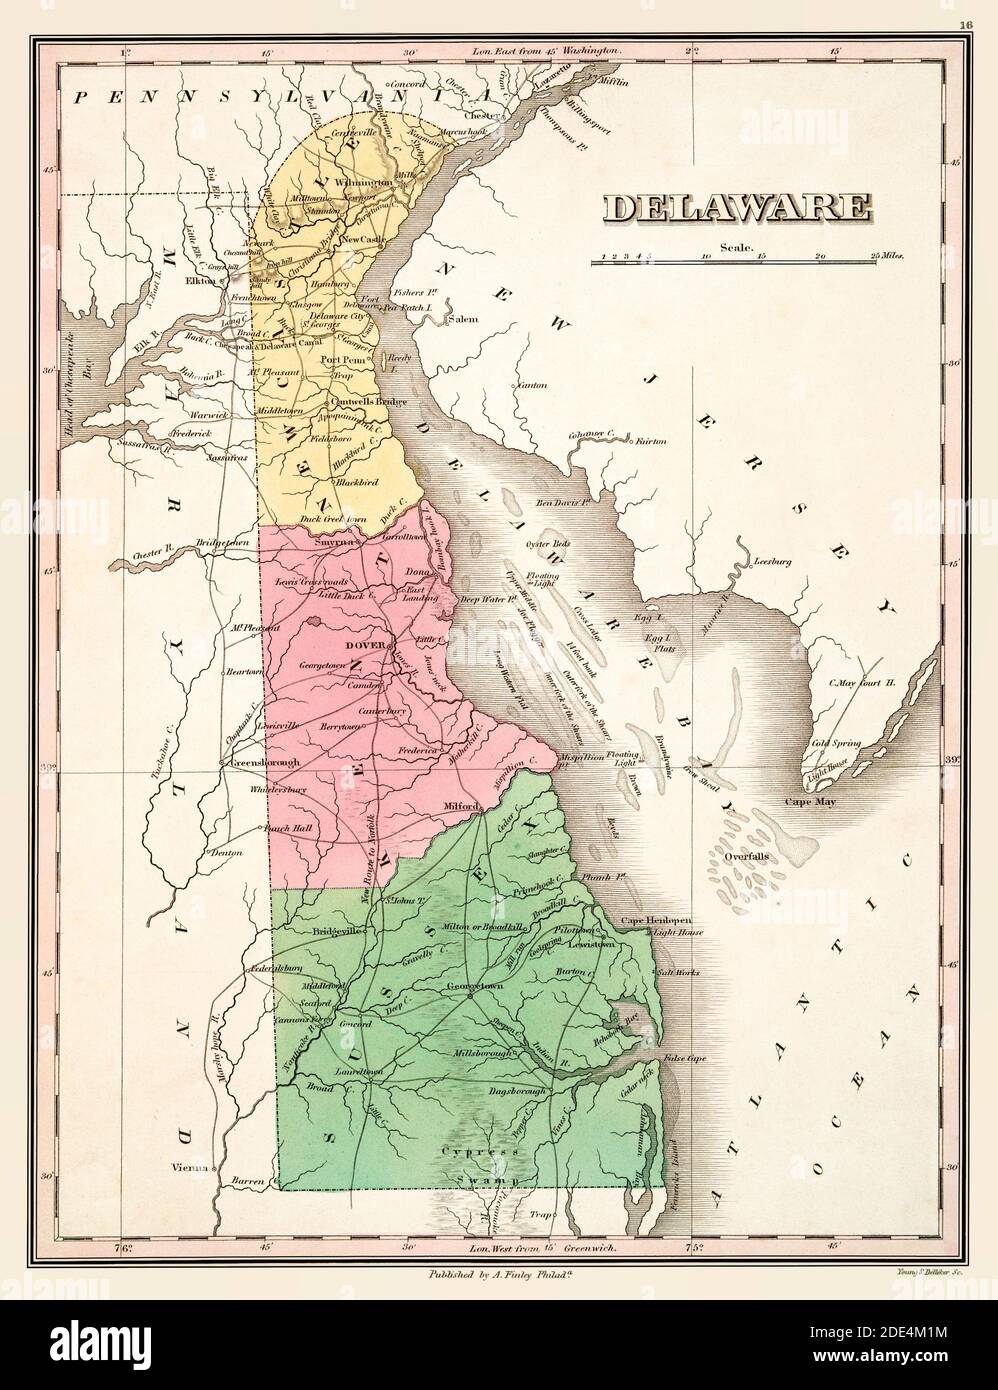 Delaware Map Circa 1824. This is an enhanced, restored reproduction of an old map of the Delaware circa 1824. It shows its three counties in color. Shows towns and geographical features. Stock Photo